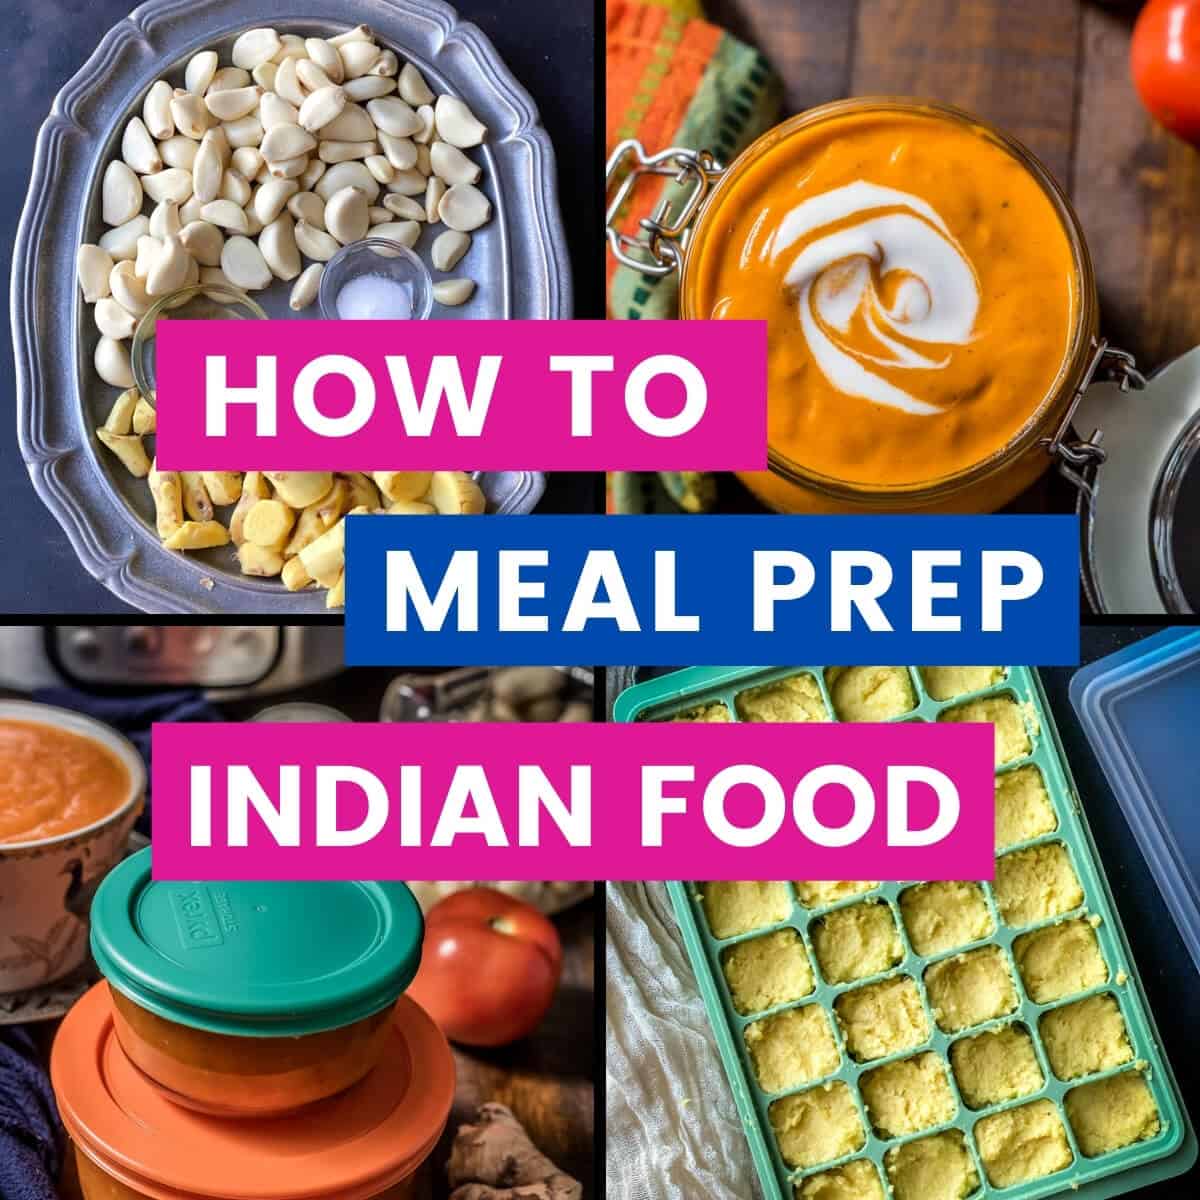 How to Meal Prep Indian food